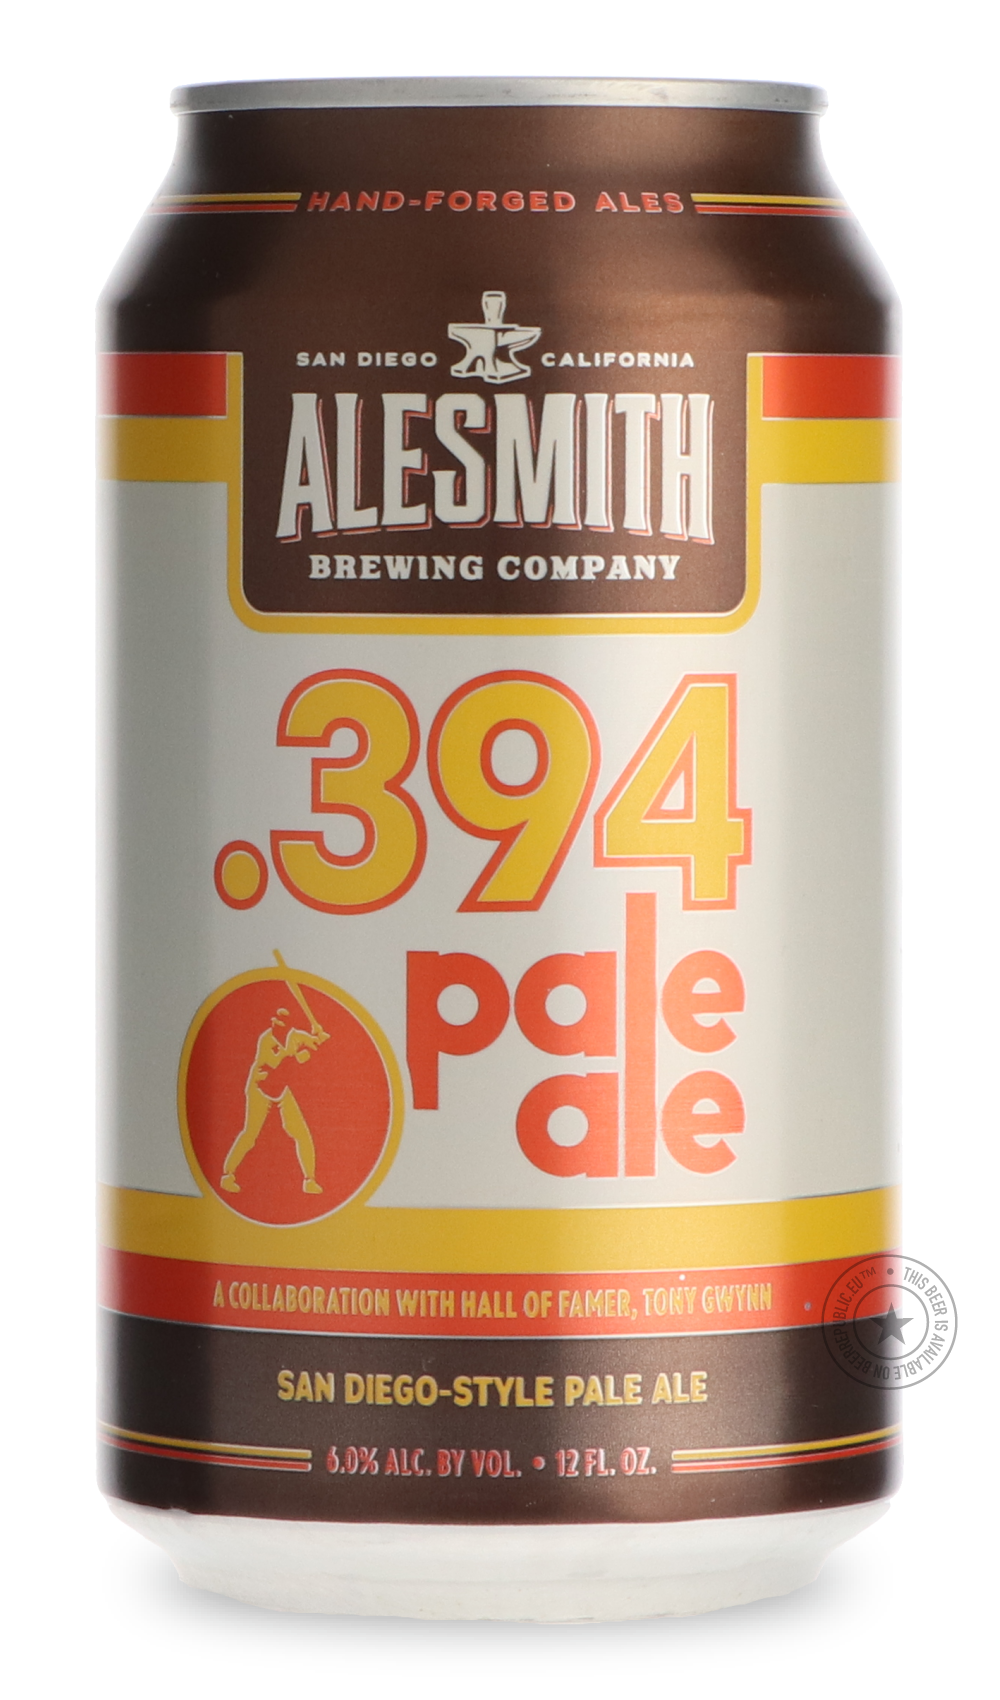 -AleSmith- .394 Pale Ale-Pale- Only @ Beer Republic - The best online beer store for American & Canadian craft beer - Buy beer online from the USA and Canada - Bier online kopen - Amerikaans bier kopen - Craft beer store - Craft beer kopen - Amerikanisch bier kaufen - Bier online kaufen - Acheter biere online - IPA - Stout - Porter - New England IPA - Hazy IPA - Imperial Stout - Barrel Aged - Barrel Aged Imperial Stout - Brown - Dark beer - Blond - Blonde - Pilsner - Lager - Wheat - Weizen - Amber - Barley 